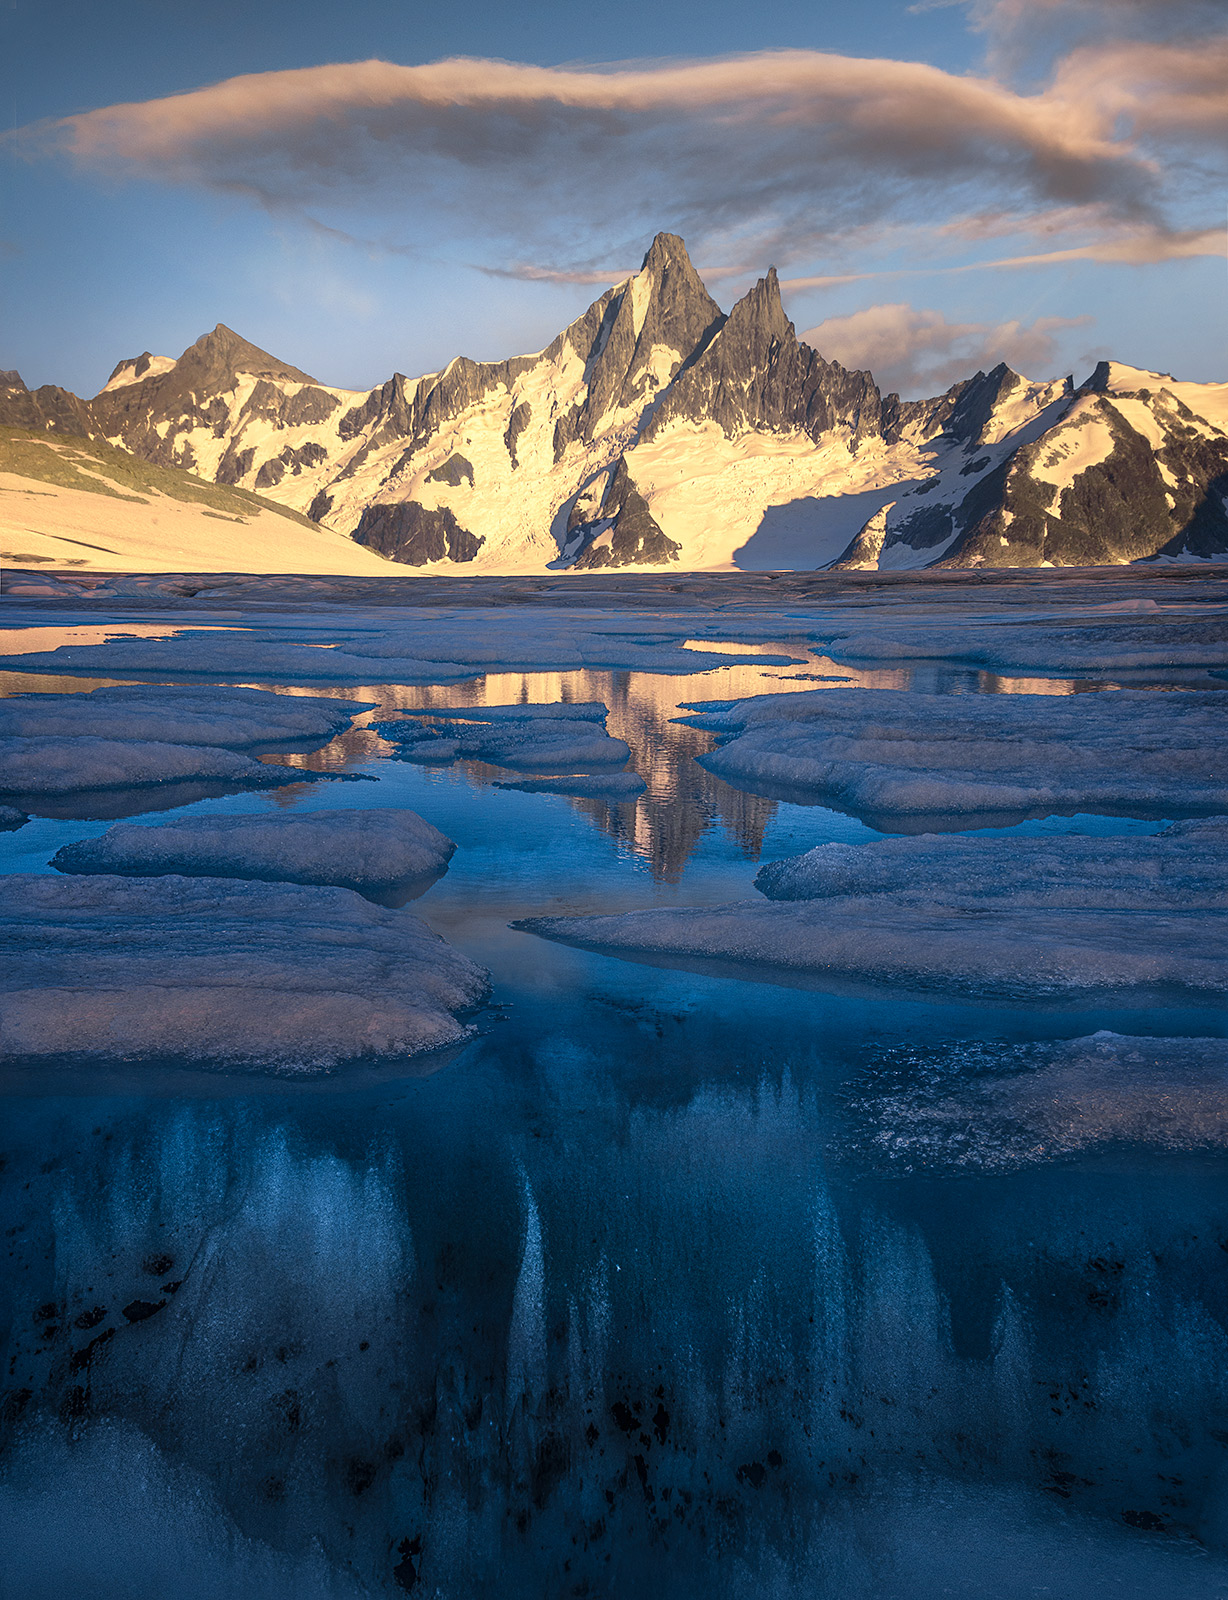 Unusual underwater formations in this glacial pool at sunset in Alaska beneath amazing, jagged mountains.